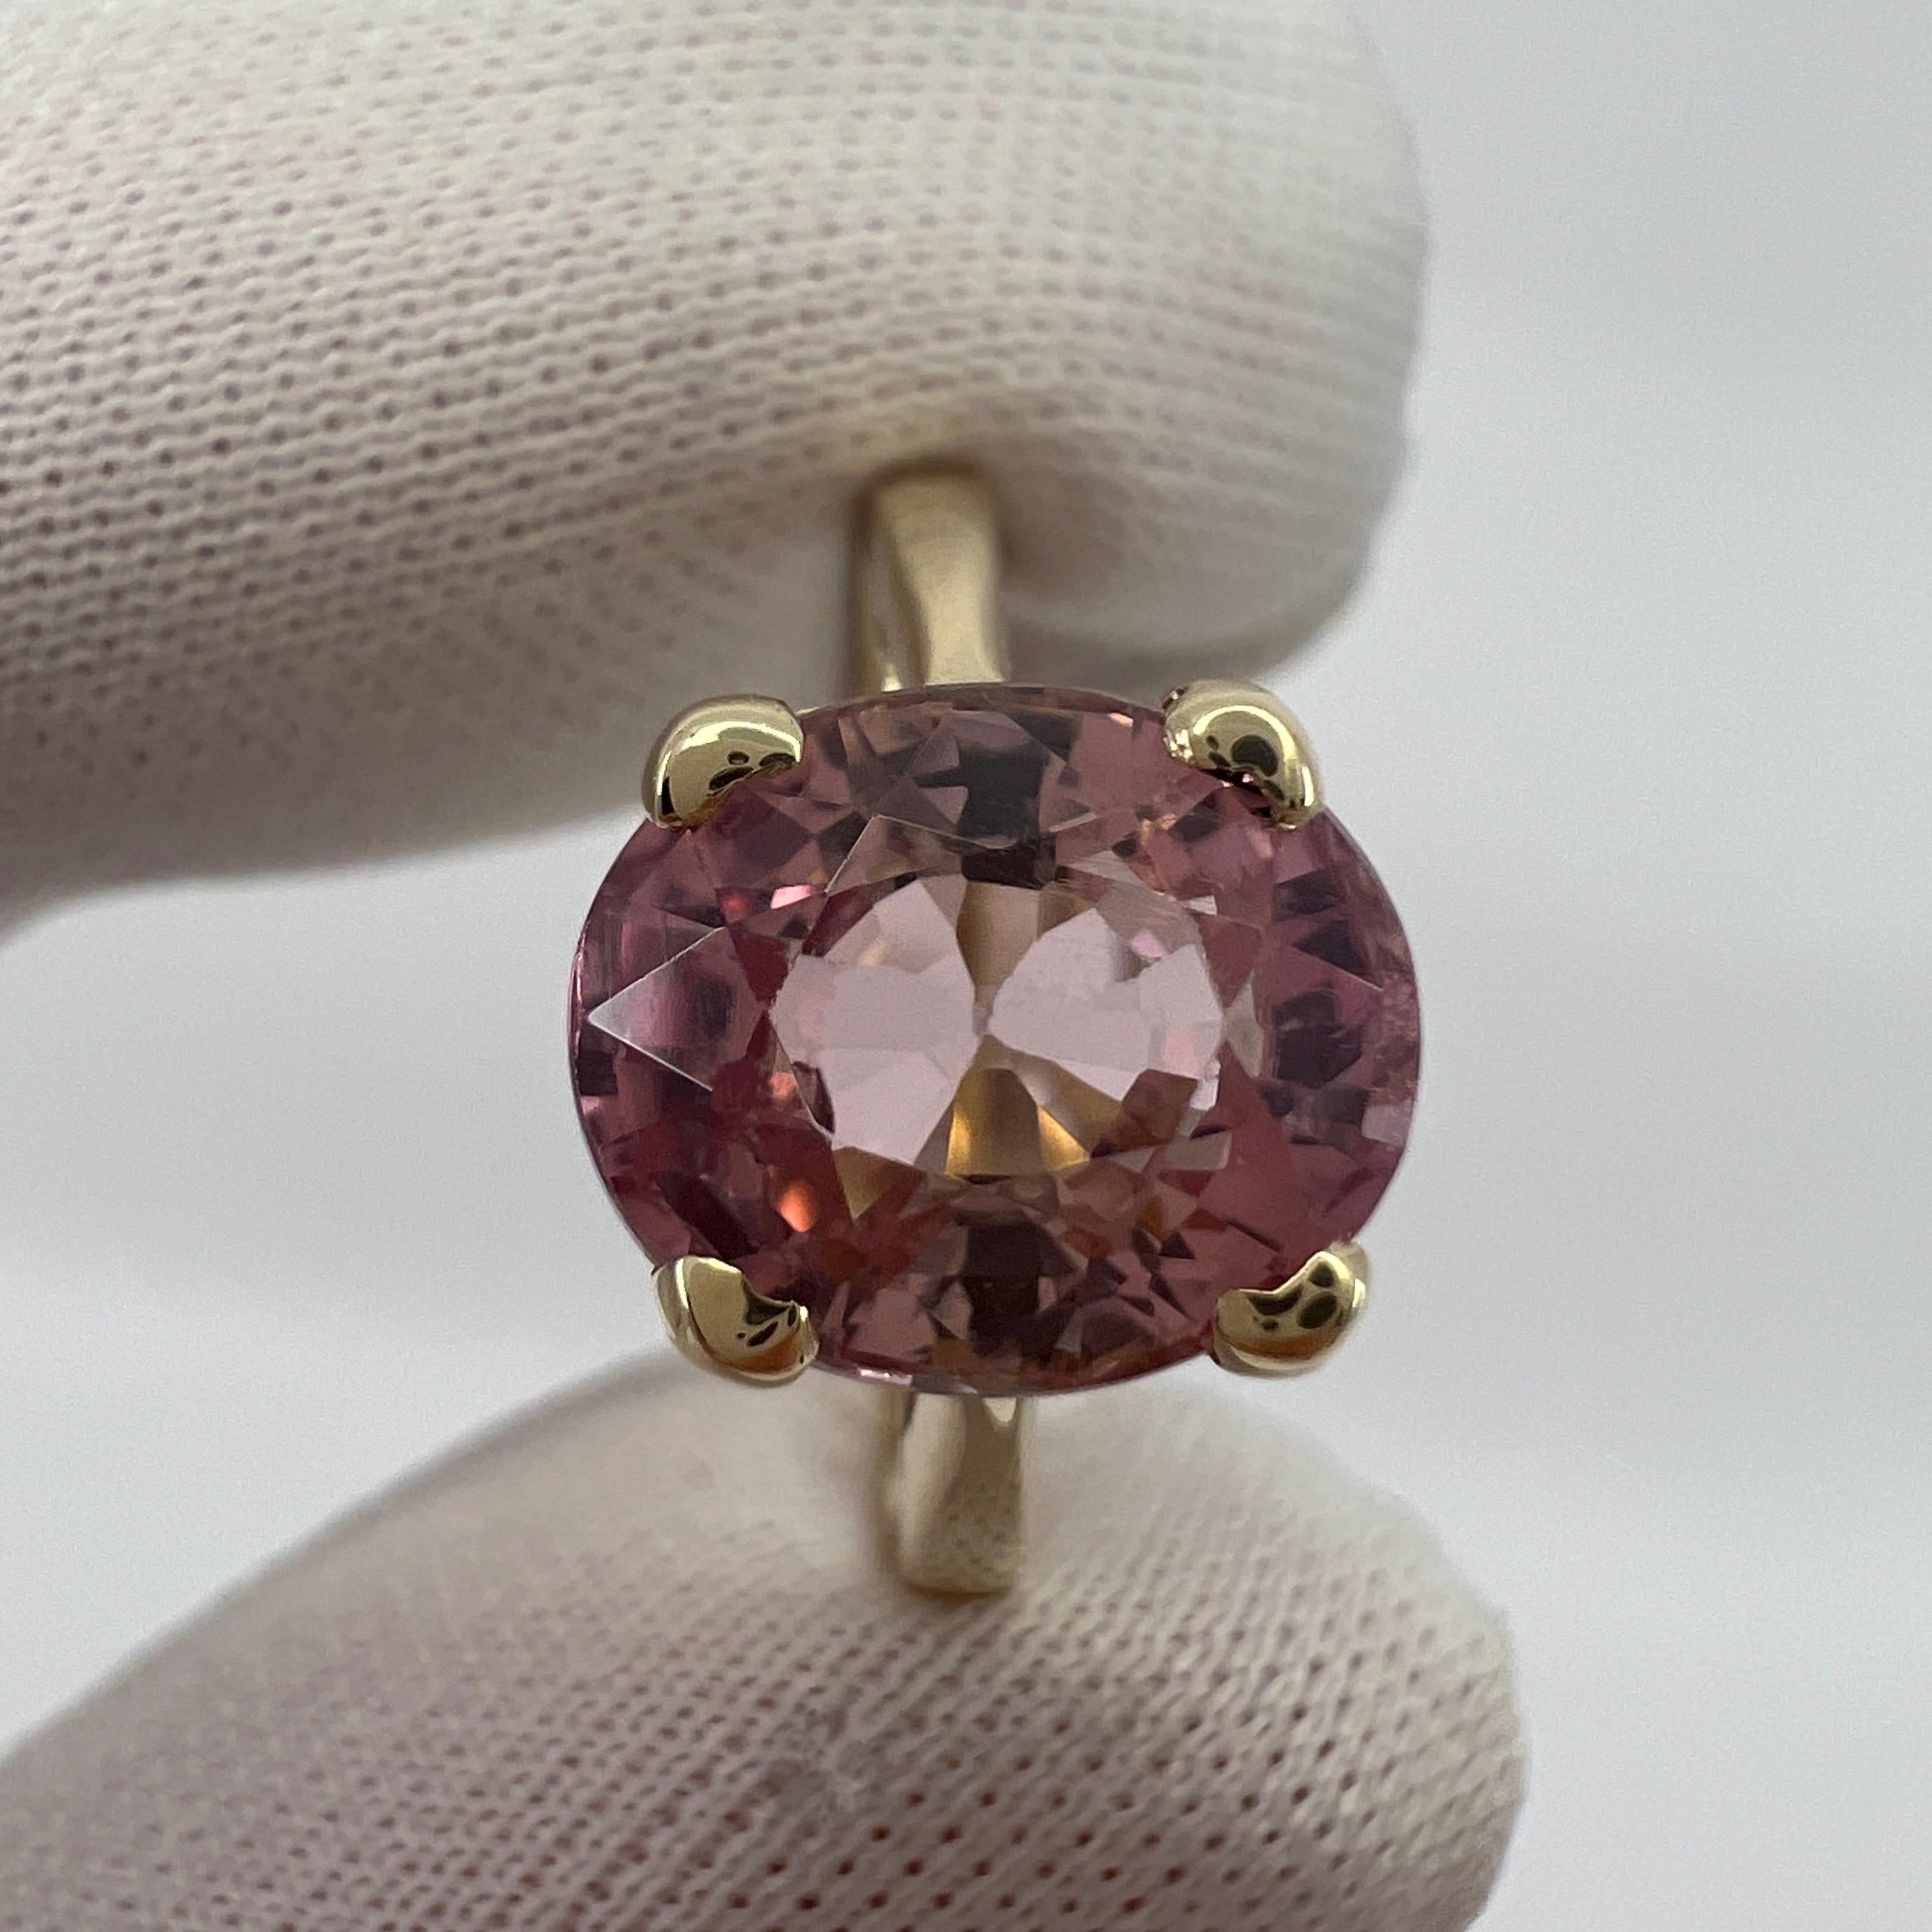 Light Pink Natural Tourmaline Oval Cut Yellow Gold Solitaire Ring.

3.11 Carat tourmaline with a stunning light pink colour and good clarity, some natural inclusions visible as shown in photos but not a dirty stone.

Also has a very good oval cut